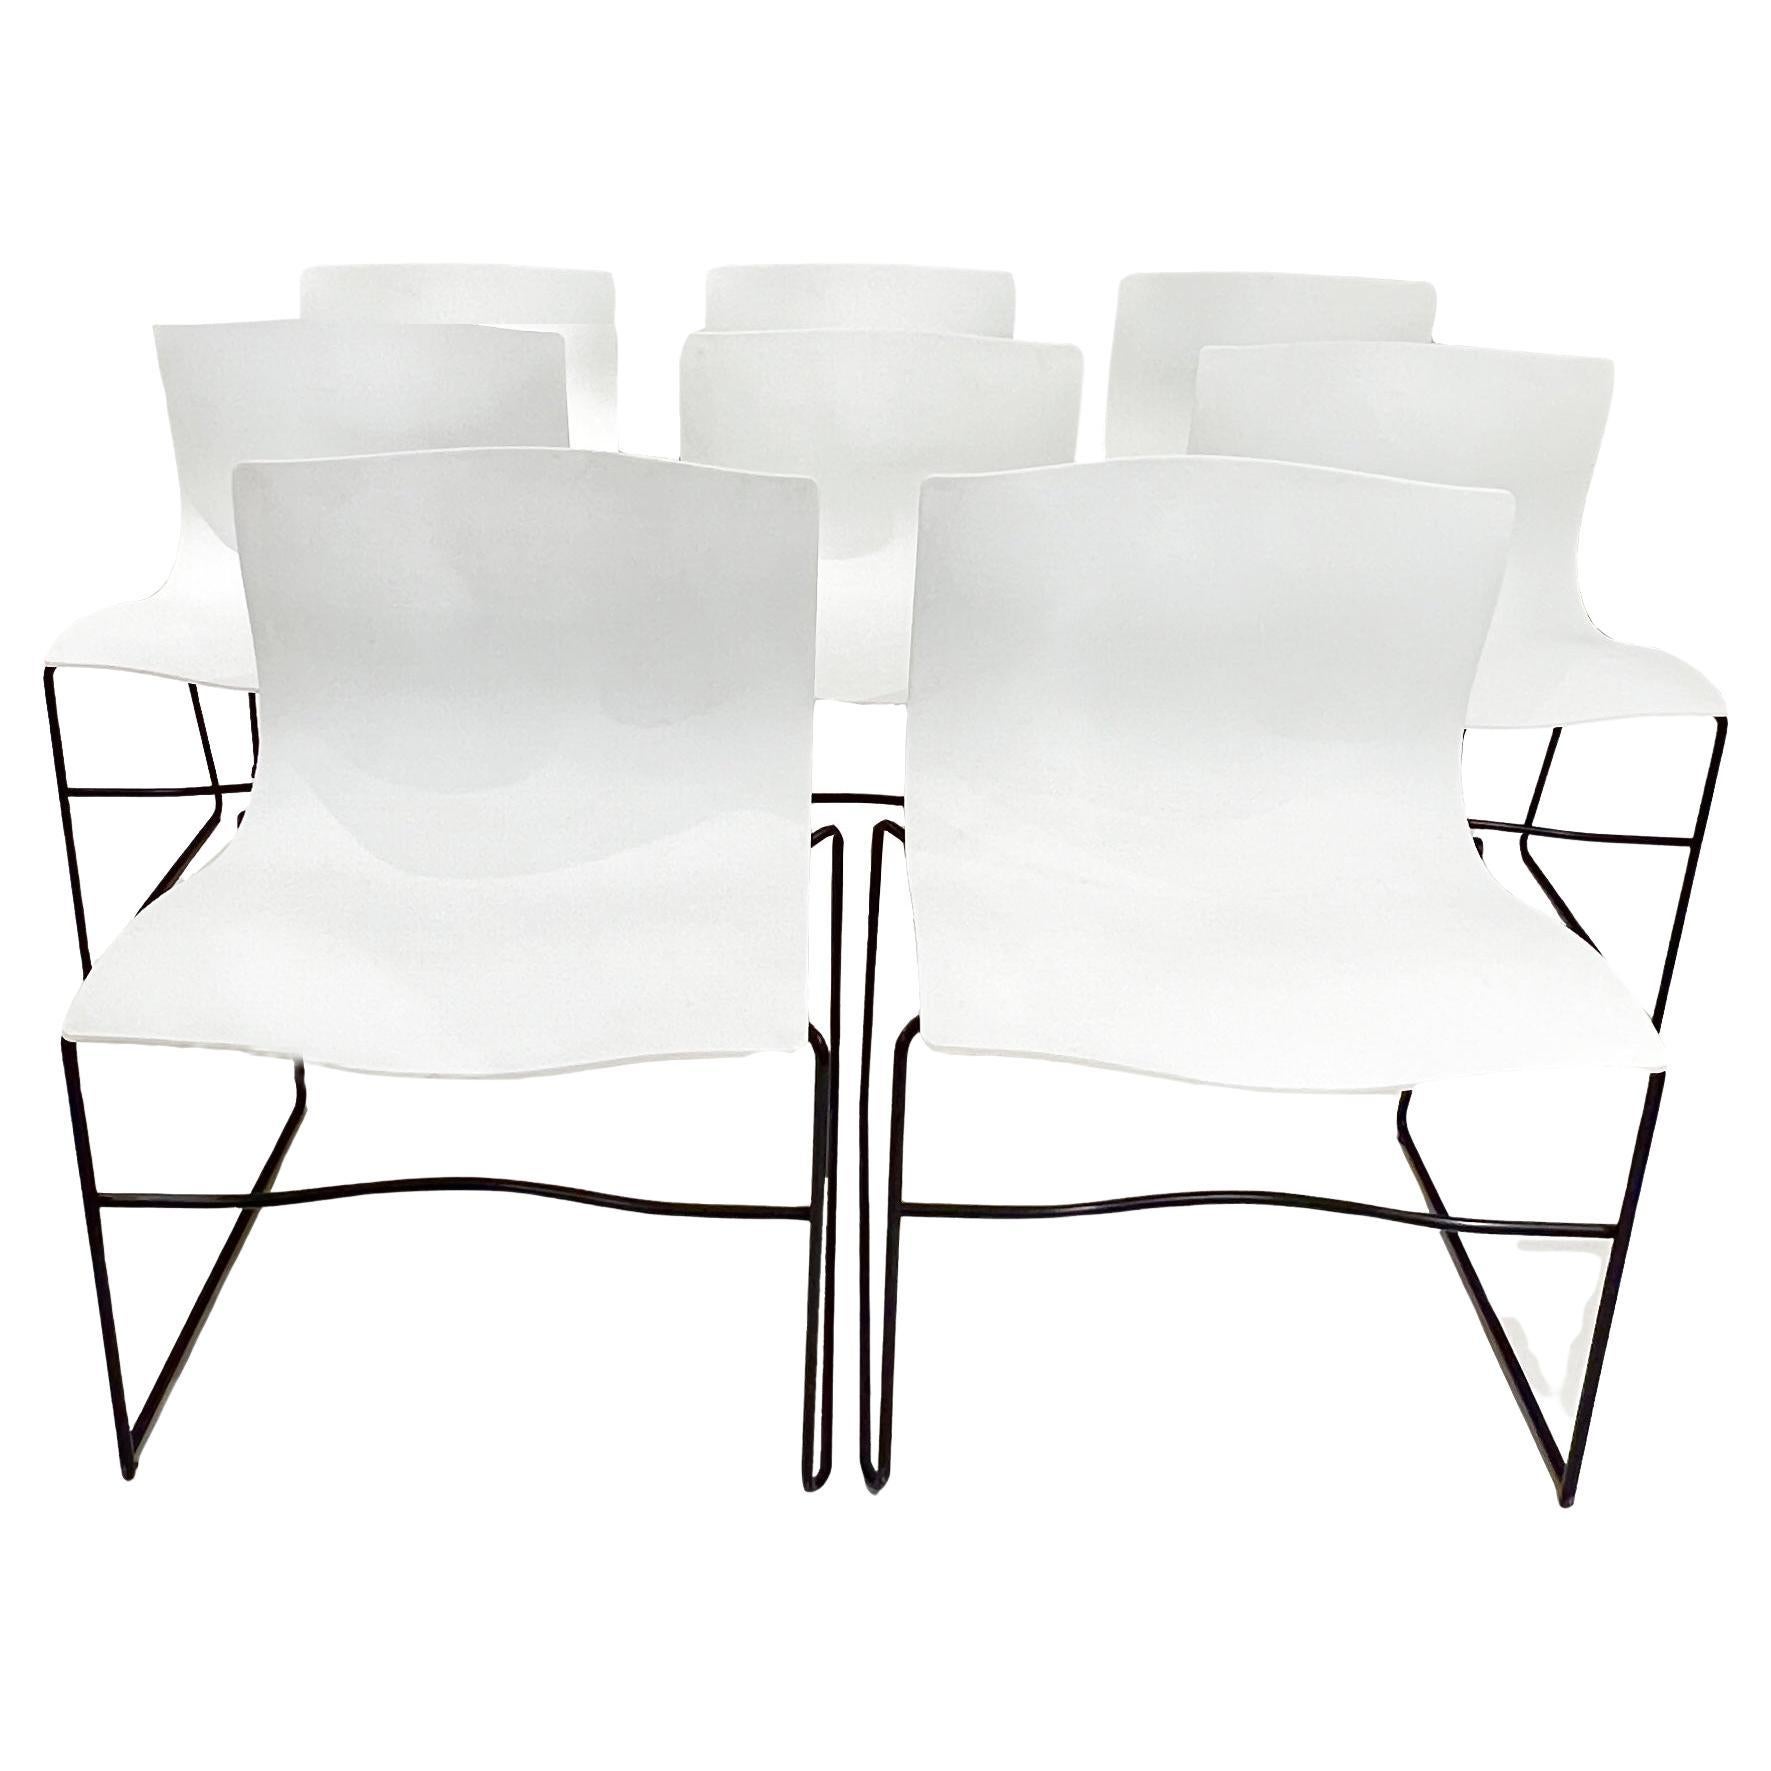 Set of 8 Massimo Vignelli for Knoll Handkerchief Chairs